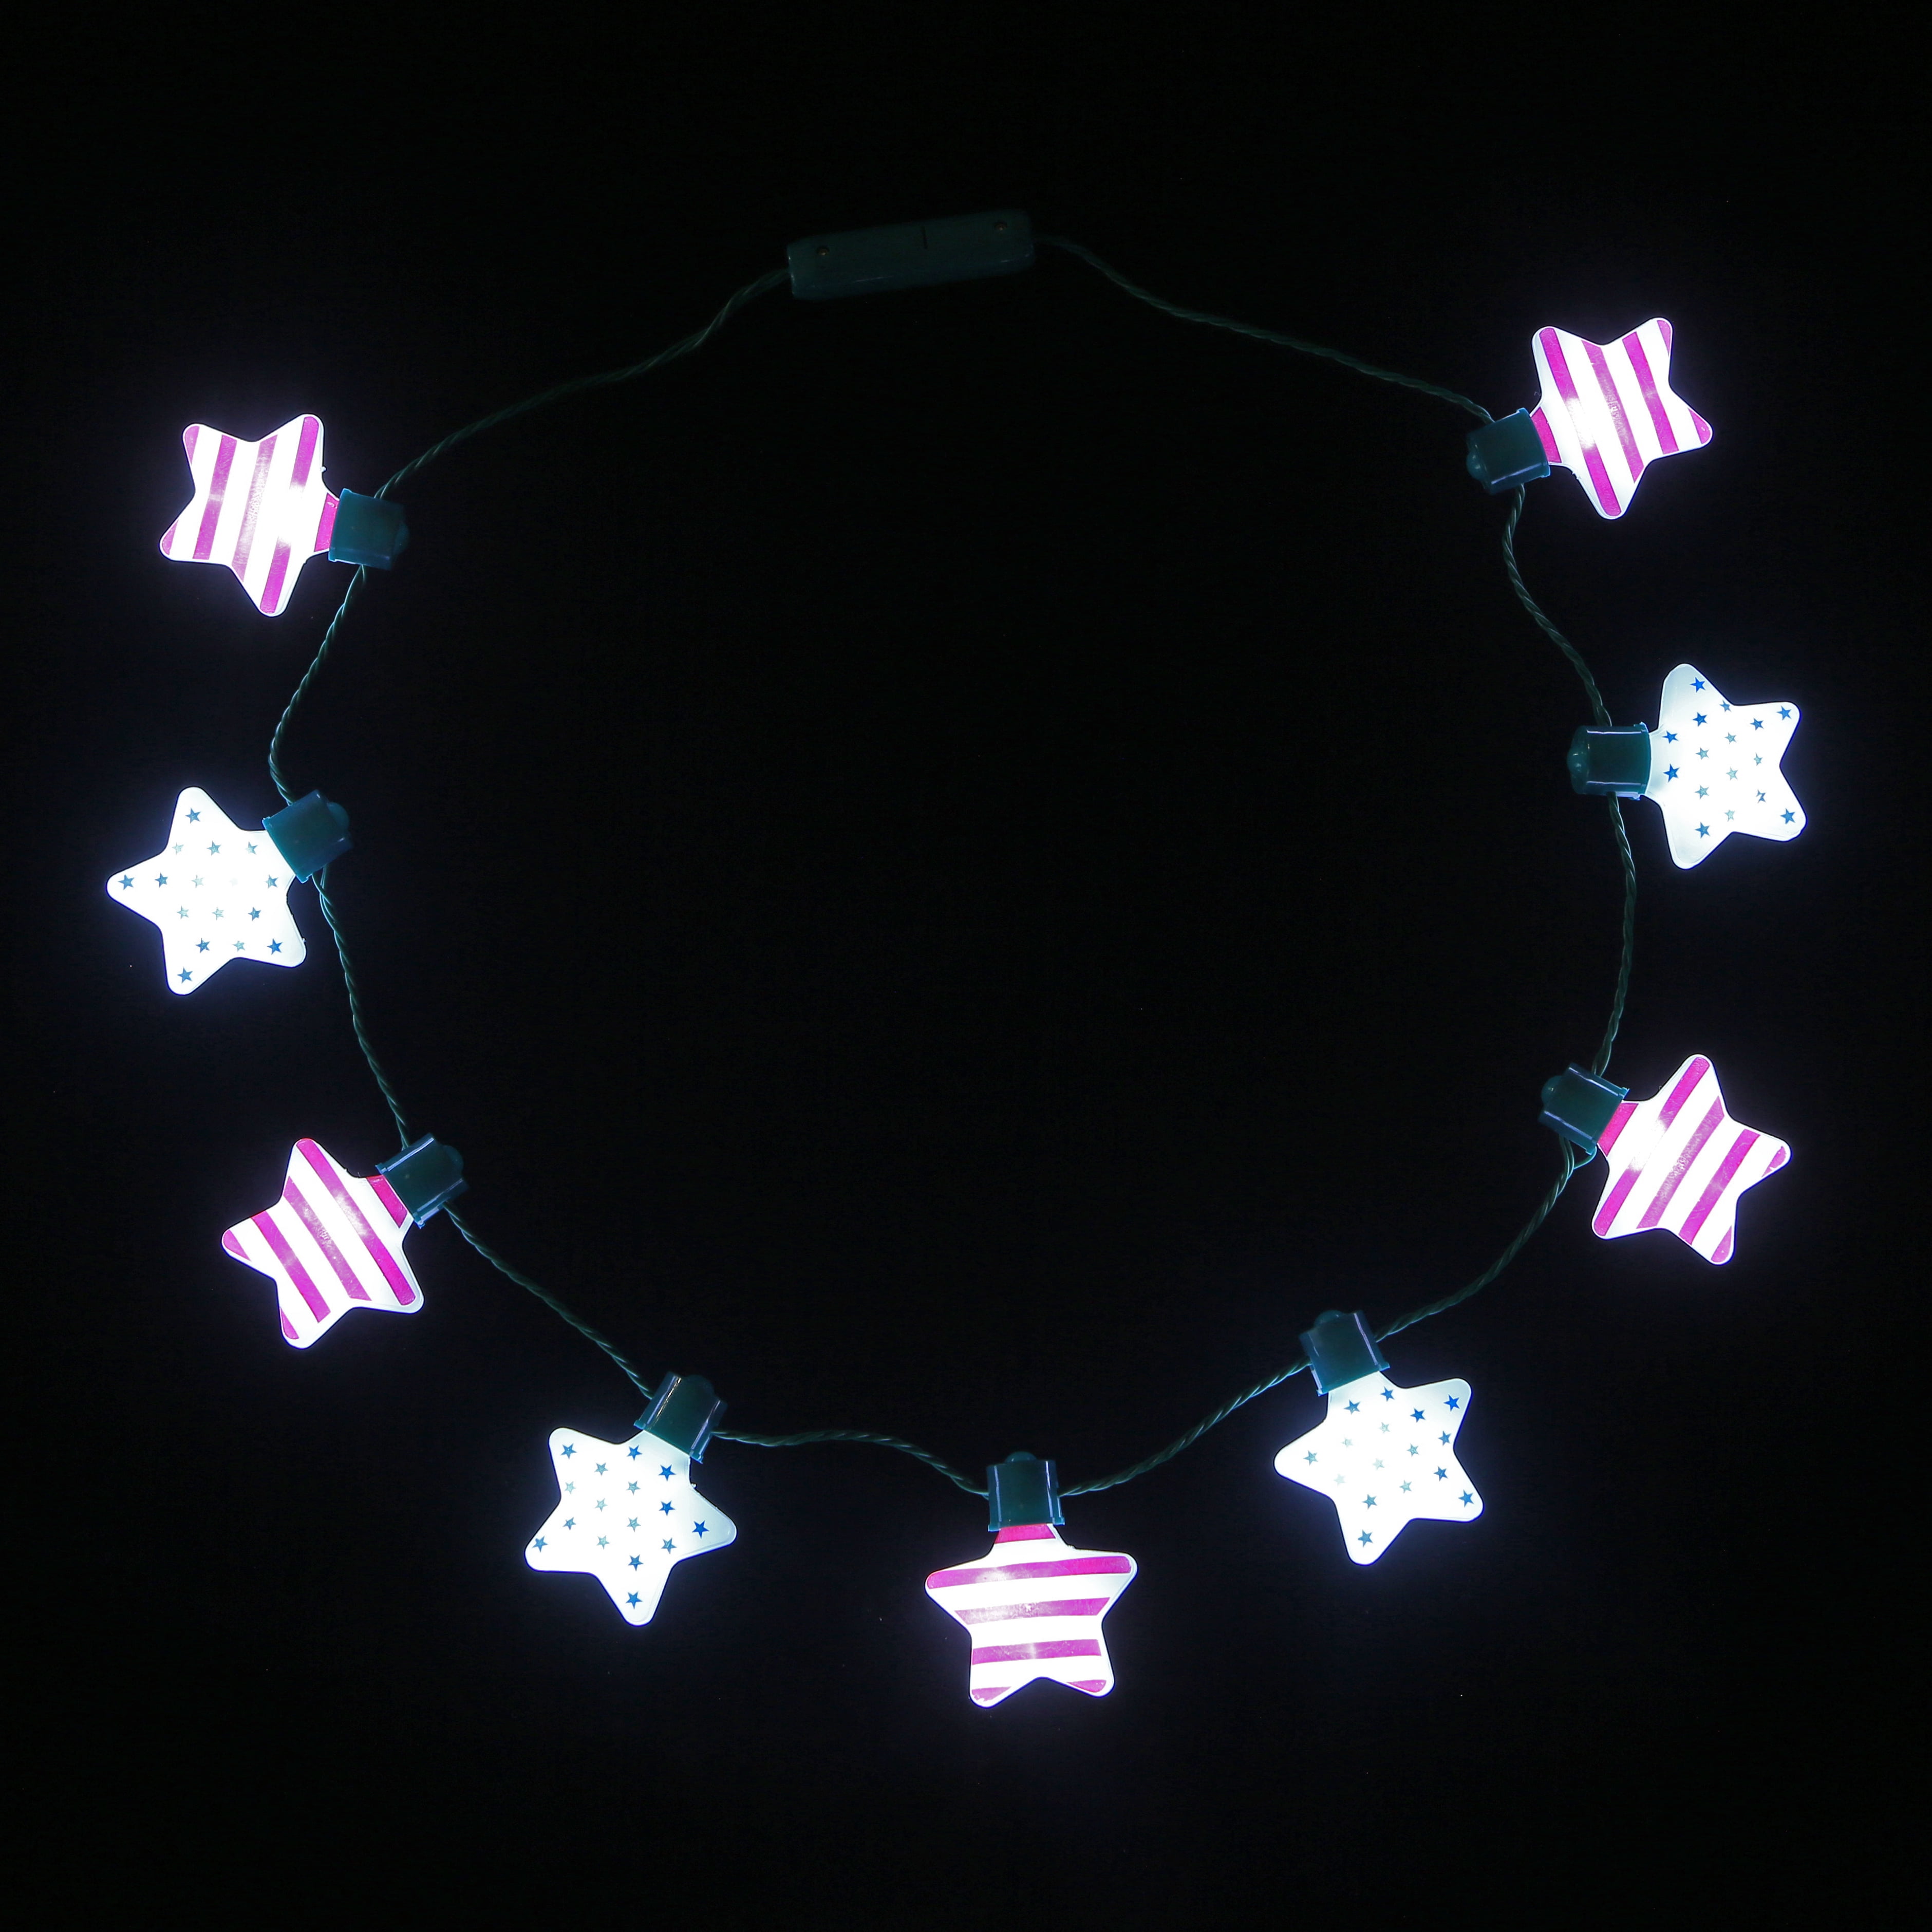 Red White Blue Patriotic Stars Light Up Necklace 3 Light Modes July 4th 